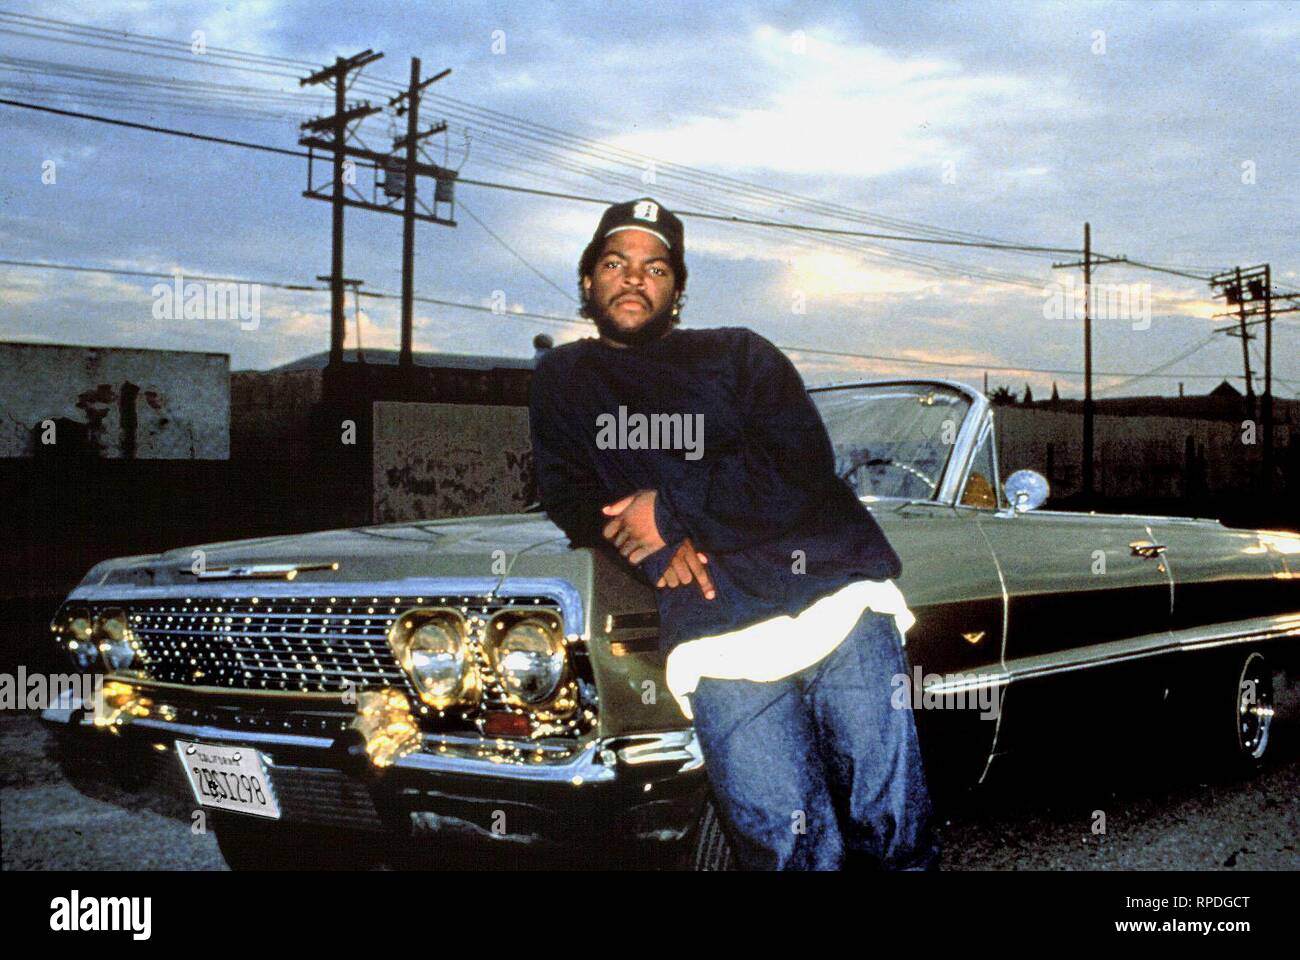 Ice cube you know